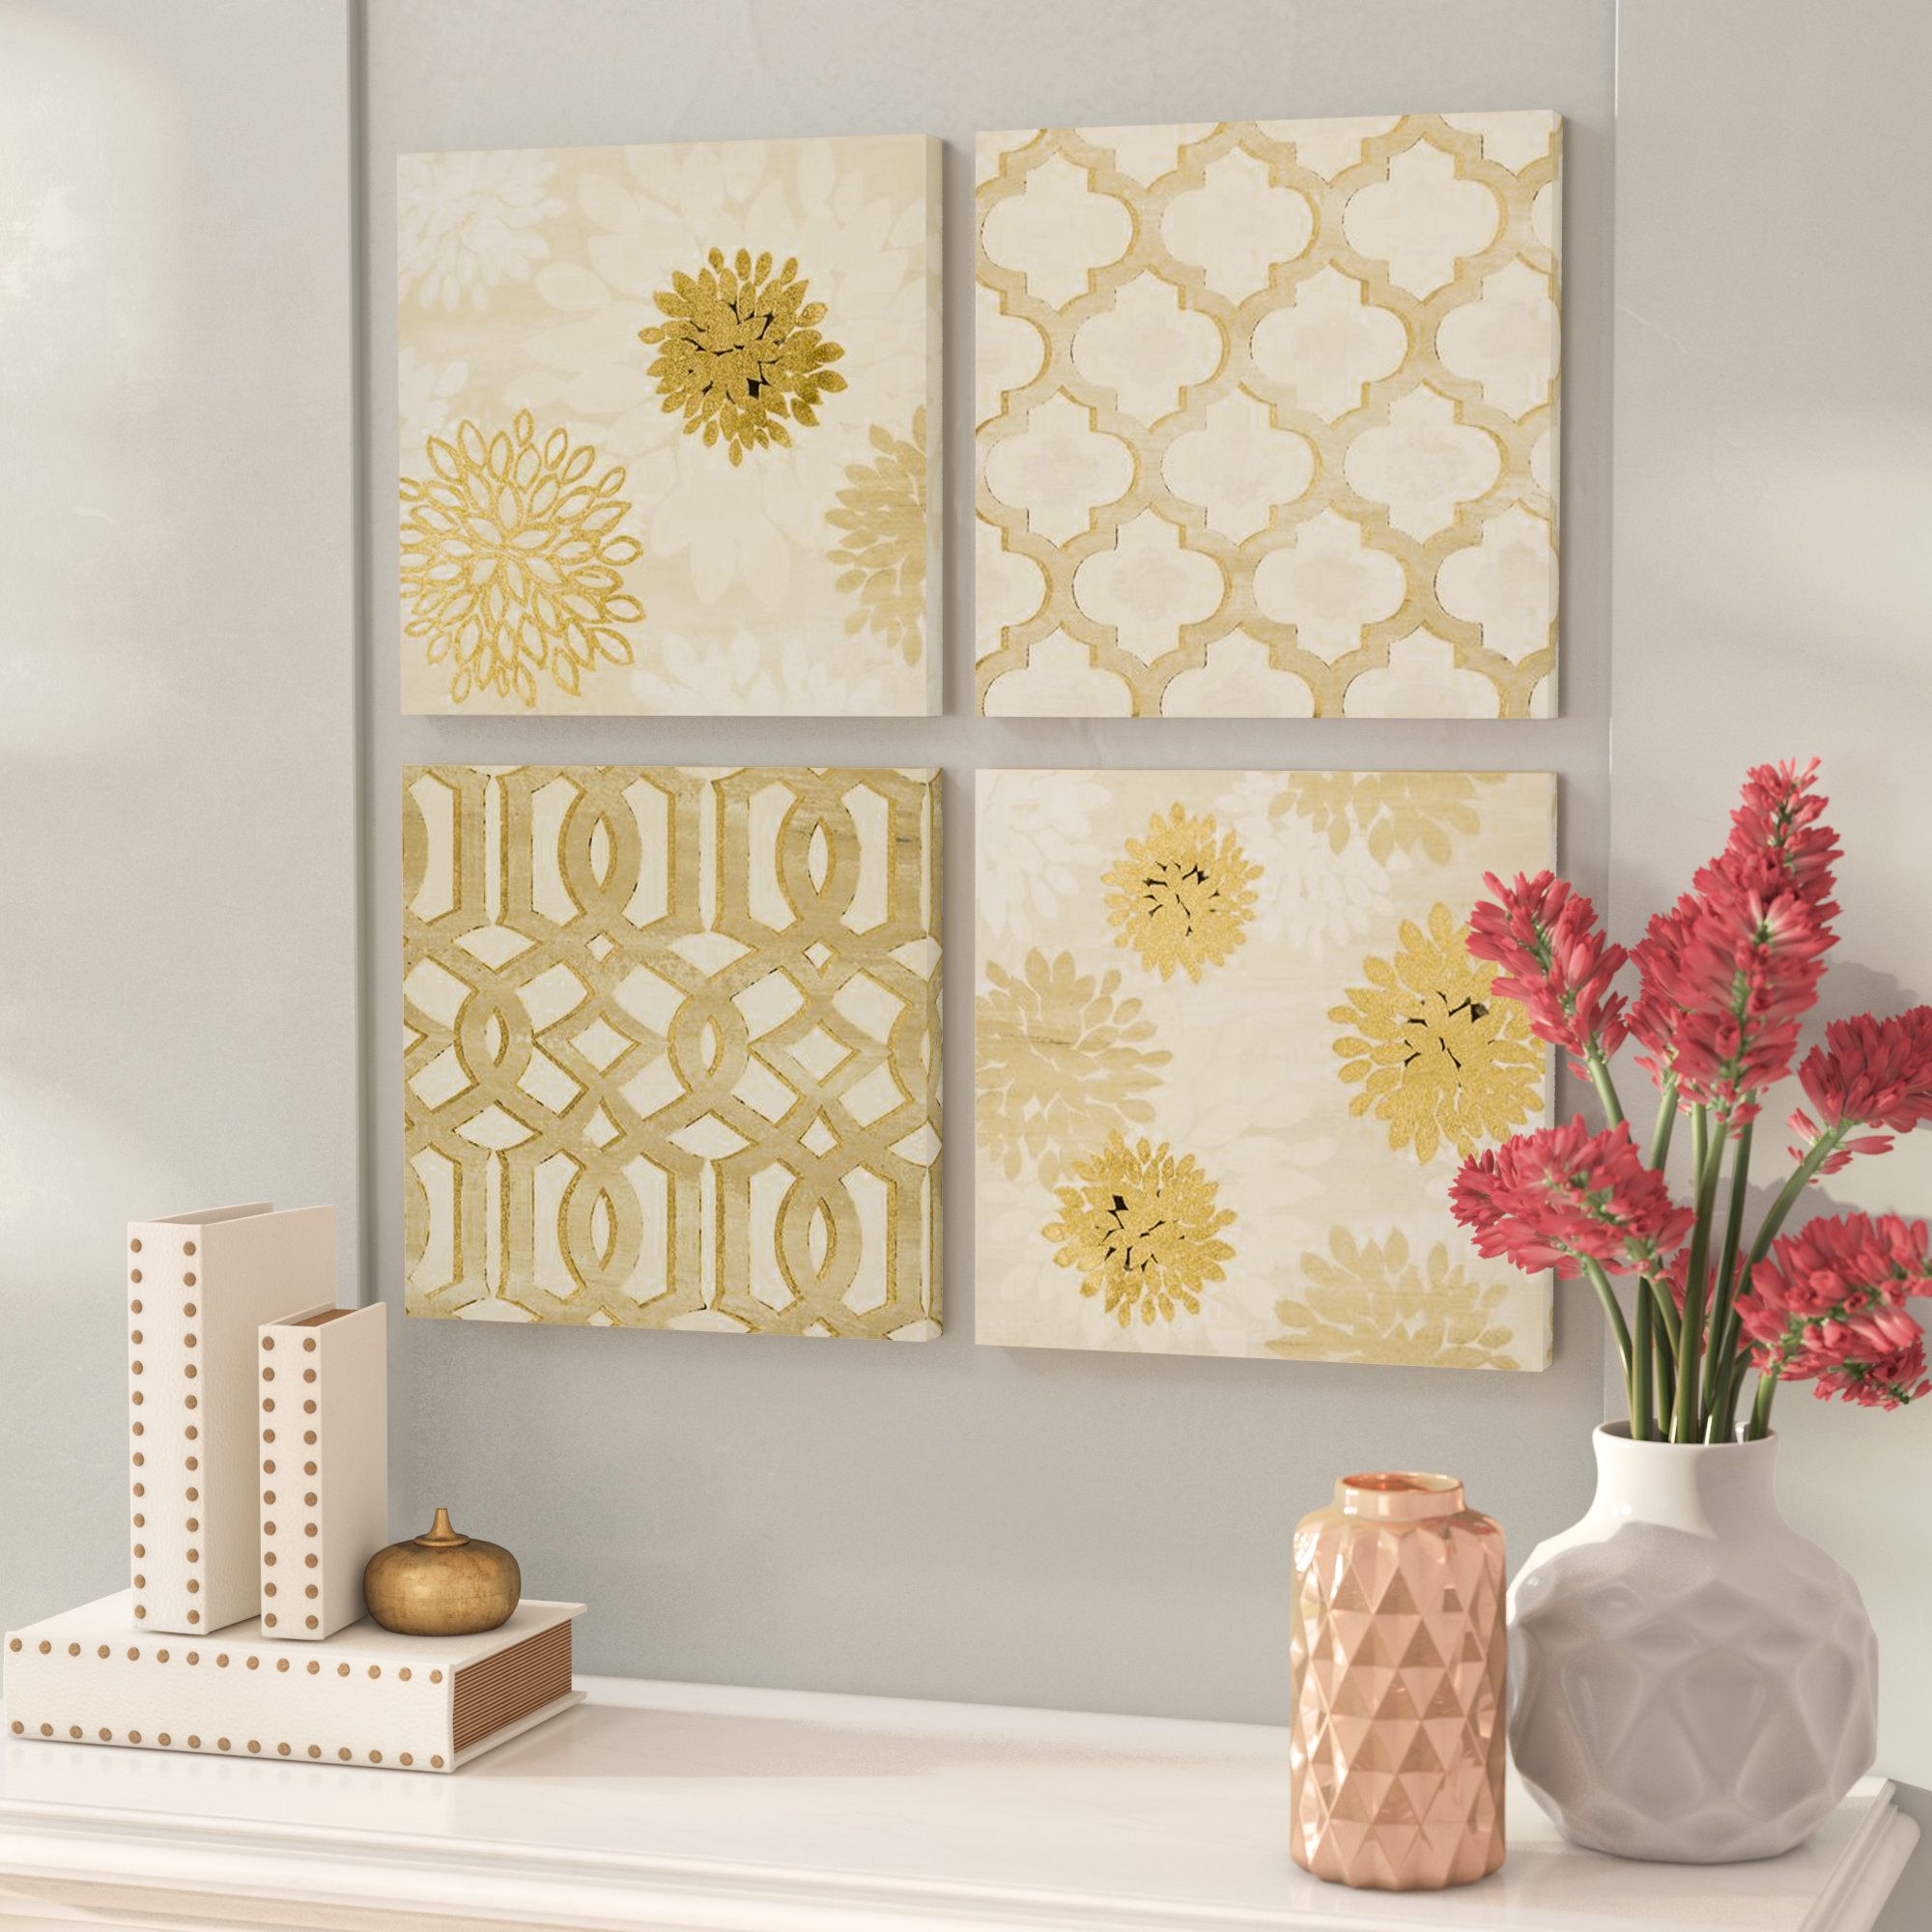 Gilded Grandeur 4 Piece Graphic Art Print Set On Wrapped Canvas For 4 Piece Wall Decor Sets By Charlton Home 